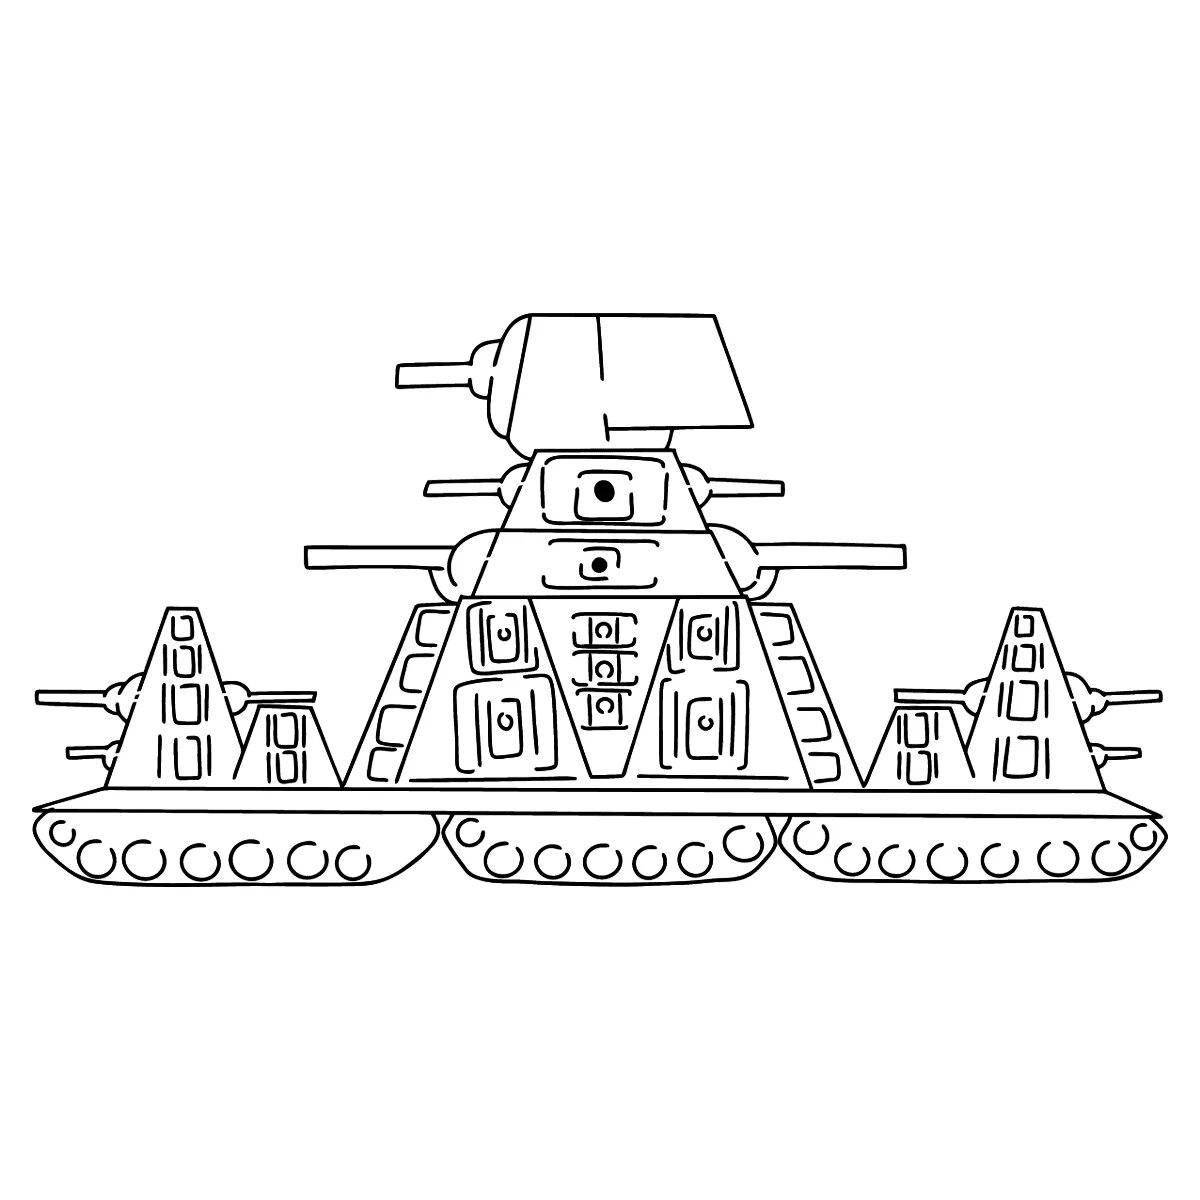 Bright gerand karl 44 coloring page